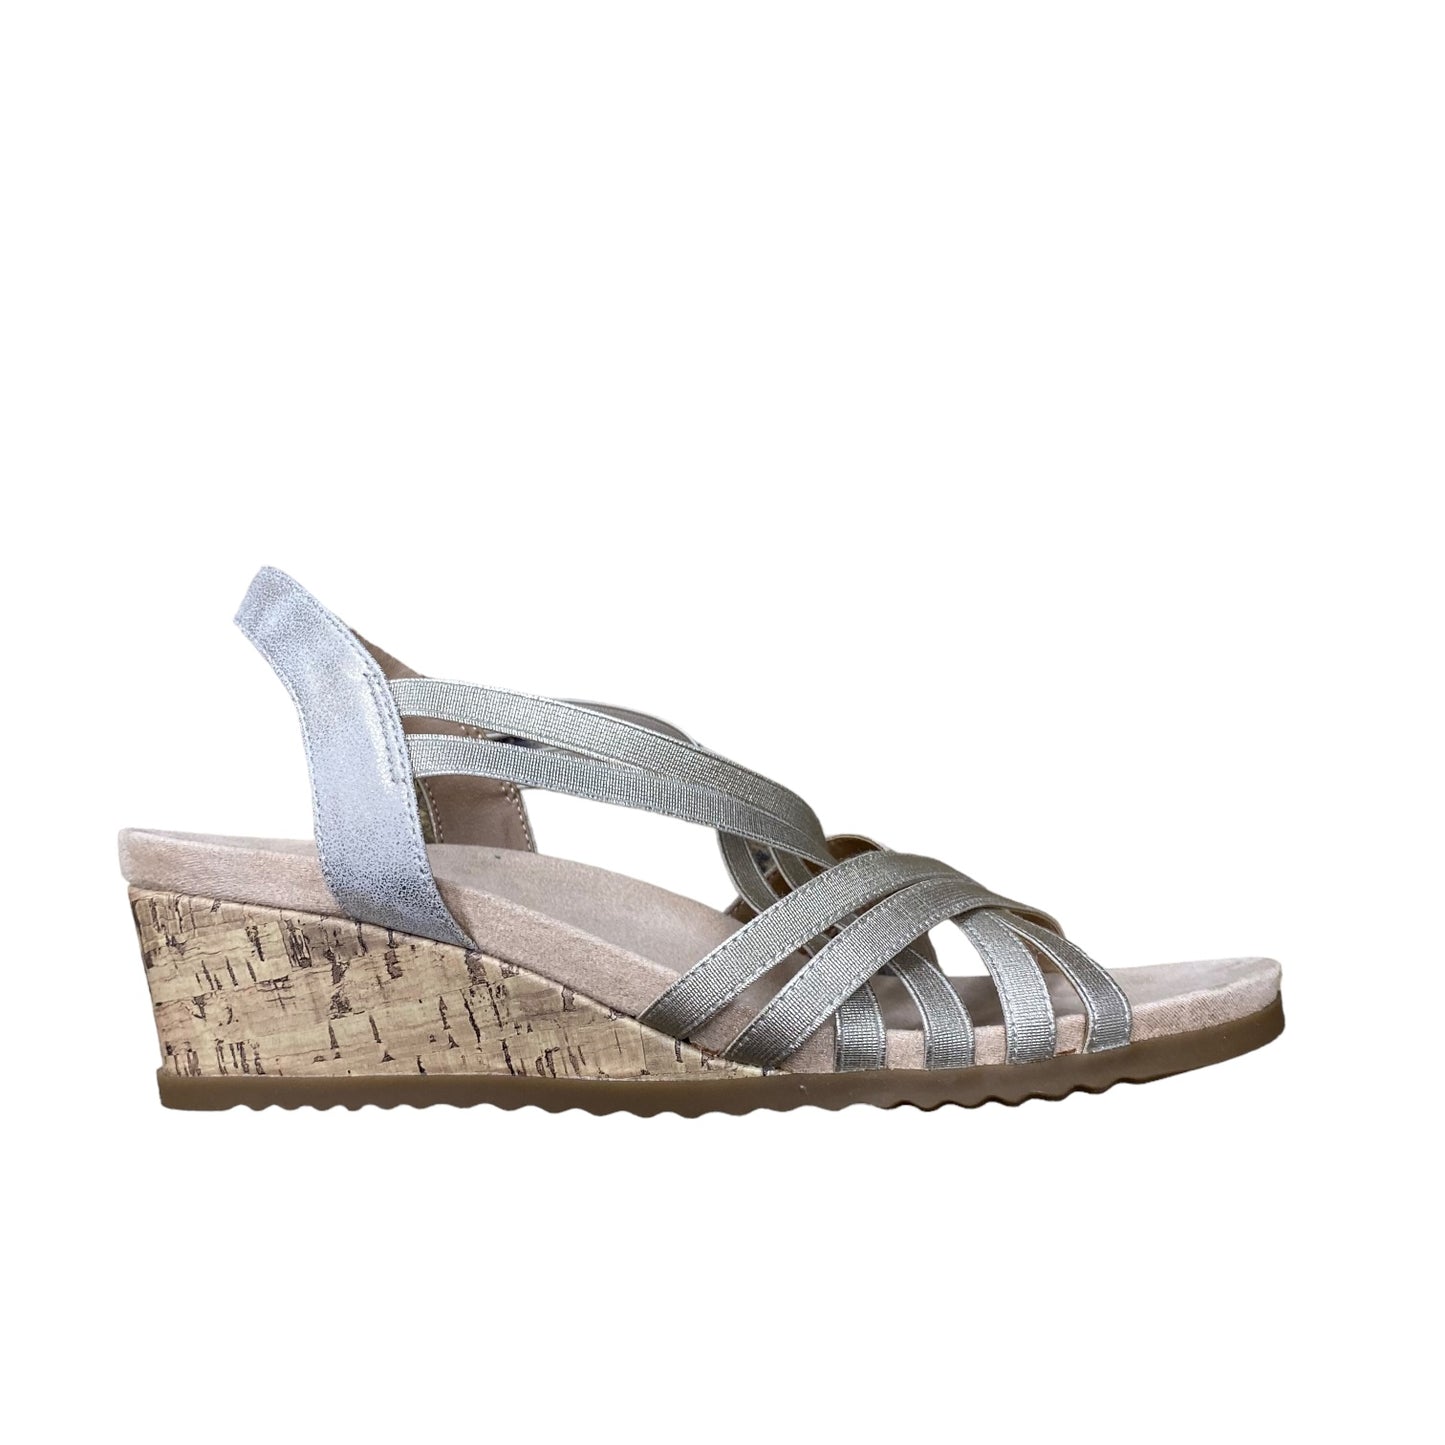 Sandals Heels Wedge By Life Stride  Size: 10